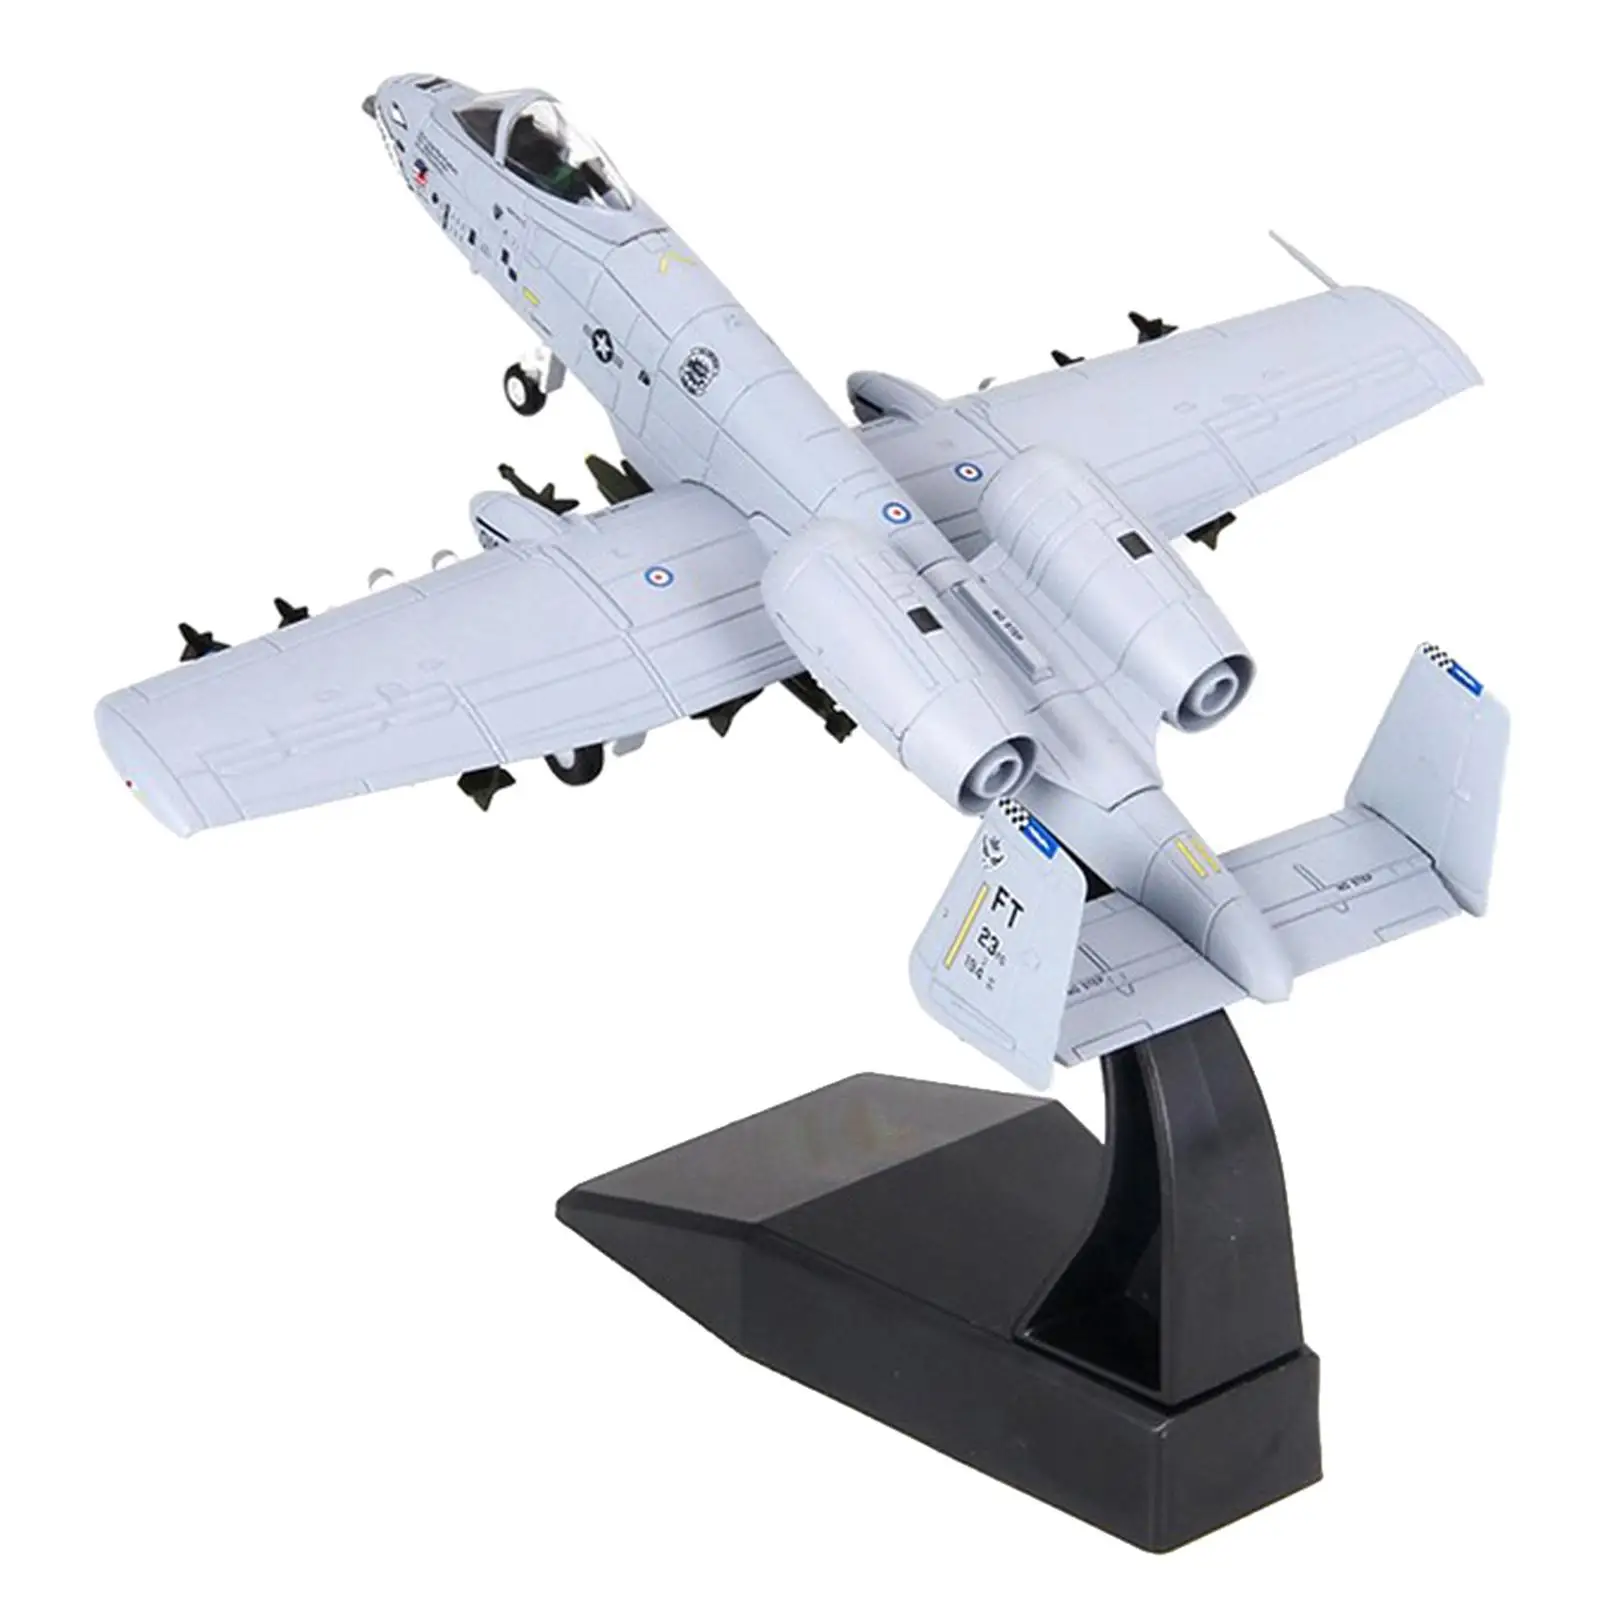 1:100 Scale Airplane Model